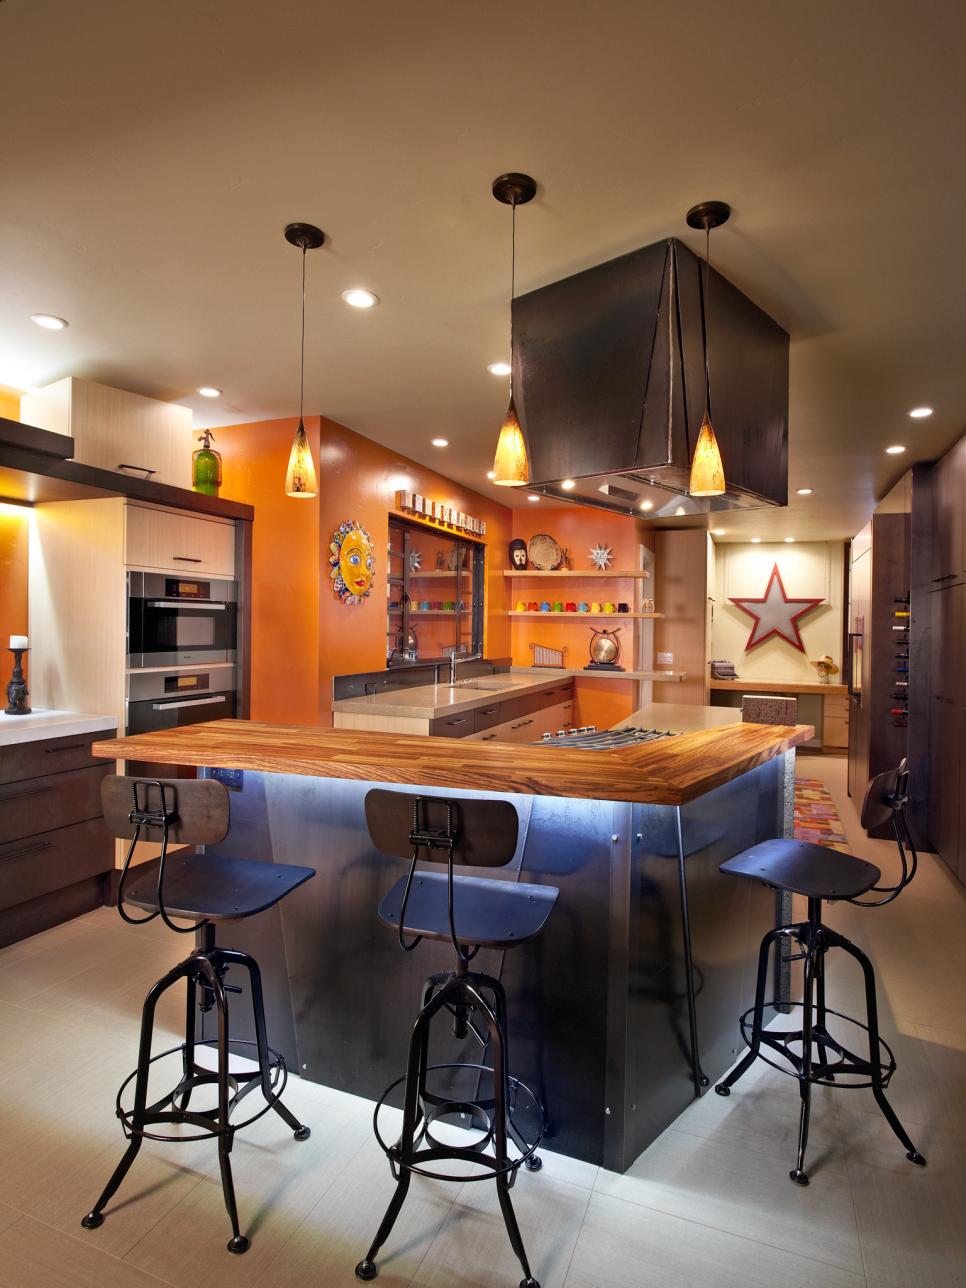 Eclectic Kitchen With Orange Accent Wall and Industrial Cabinetry